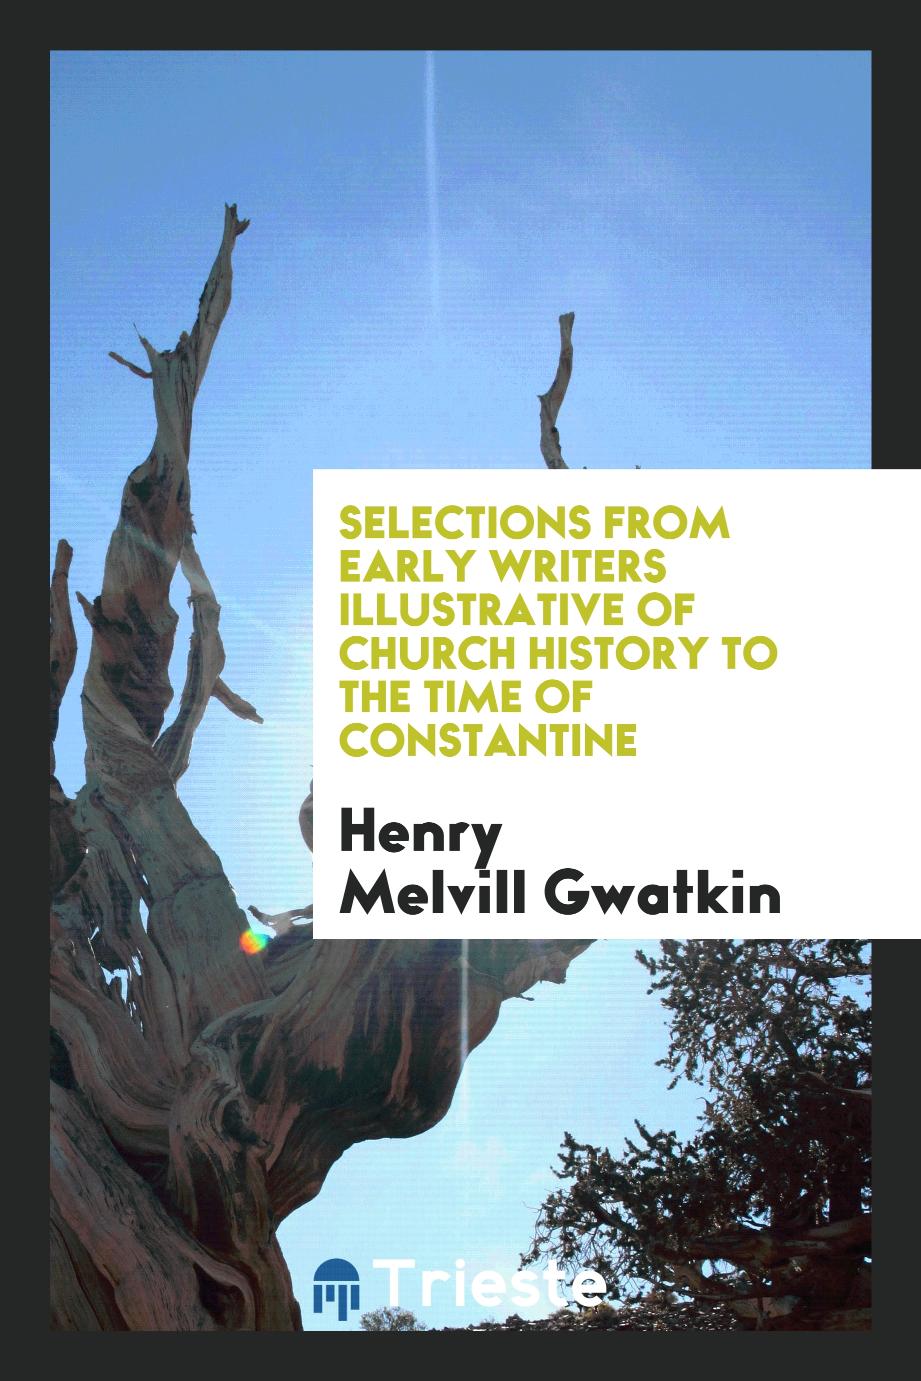 Selections from early writers illustrative of church history to the time of Constantine